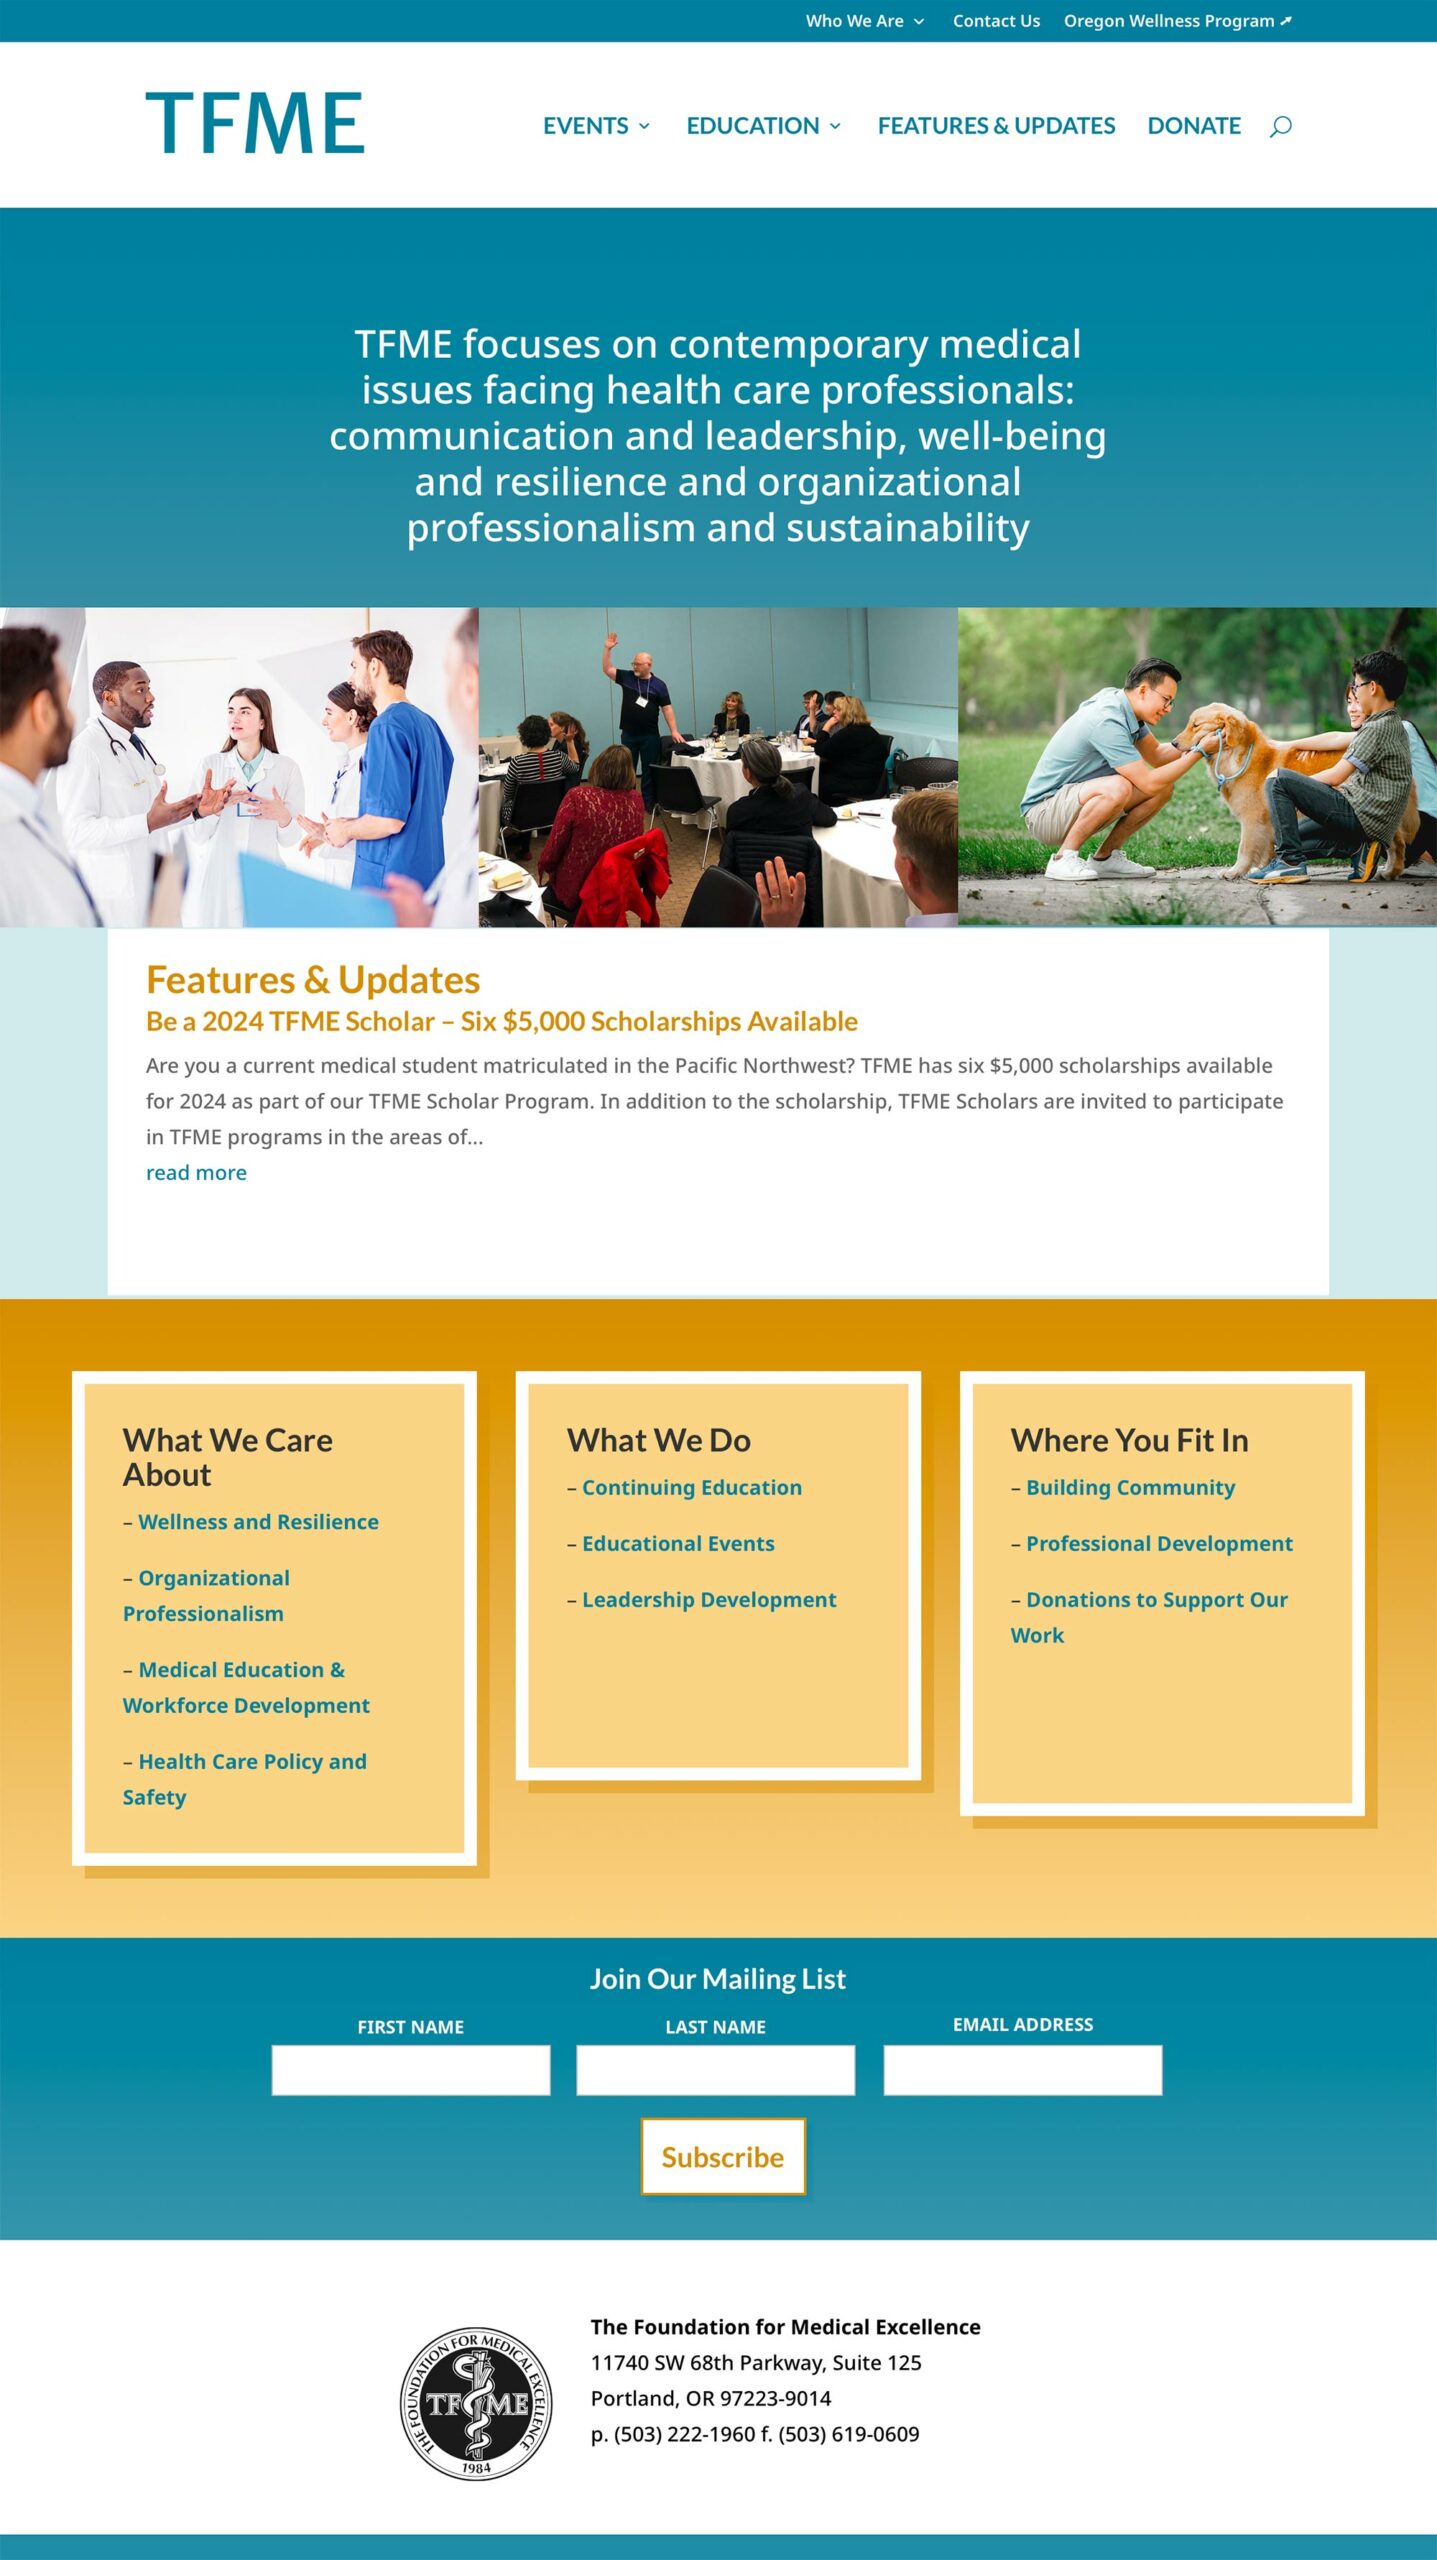 Home page of the Foundation for Medical Excellence website